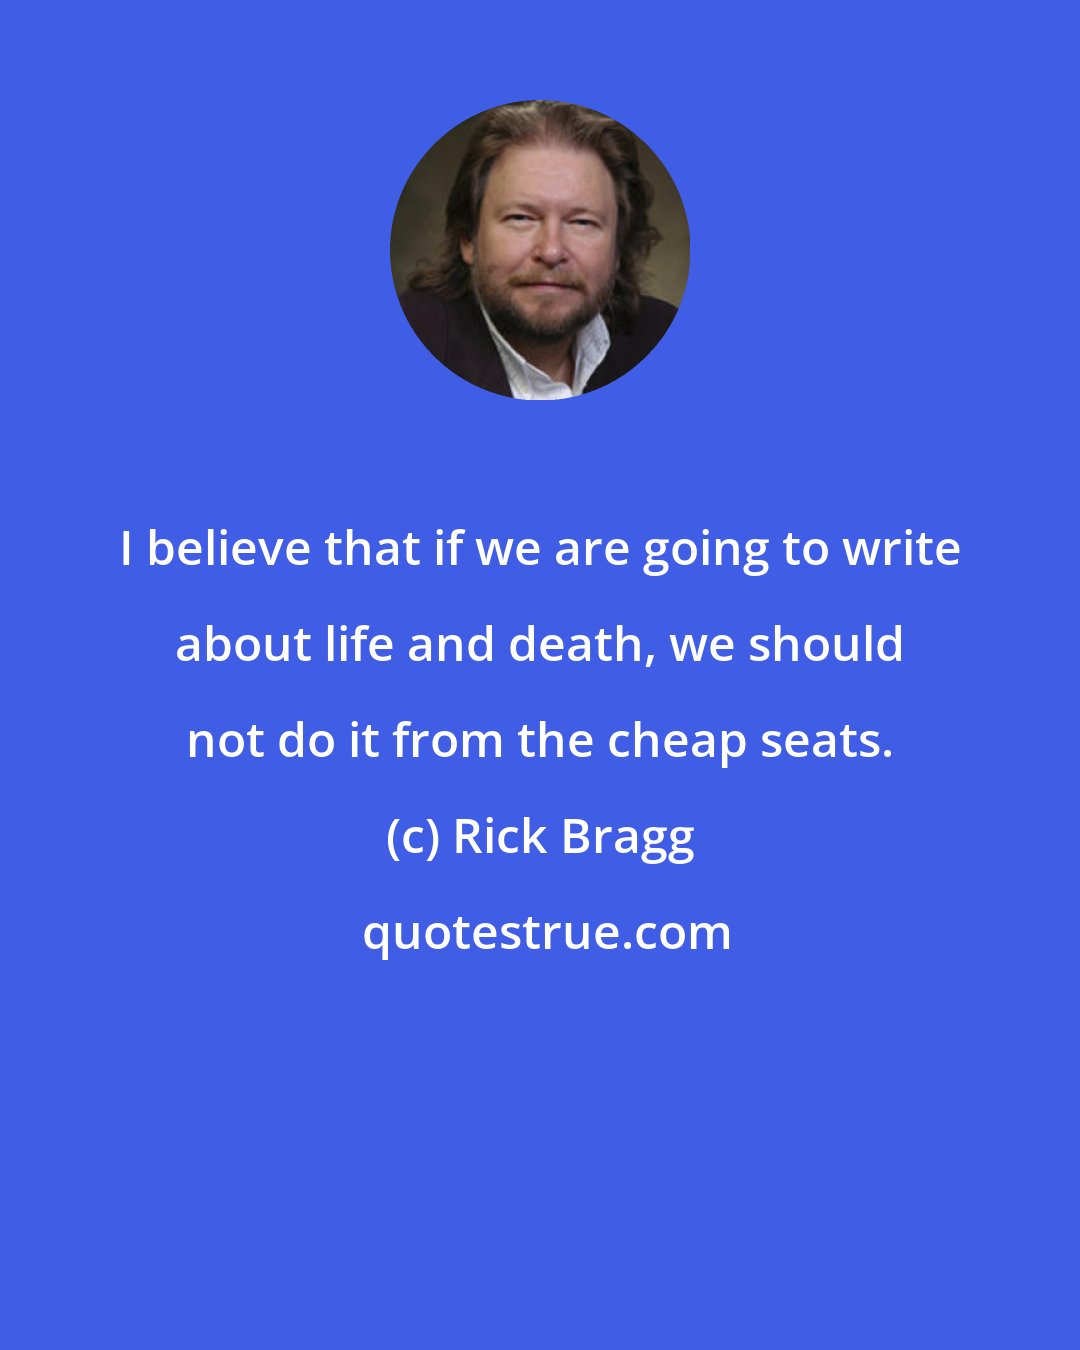 Rick Bragg: I believe that if we are going to write about life and death, we should not do it from the cheap seats.